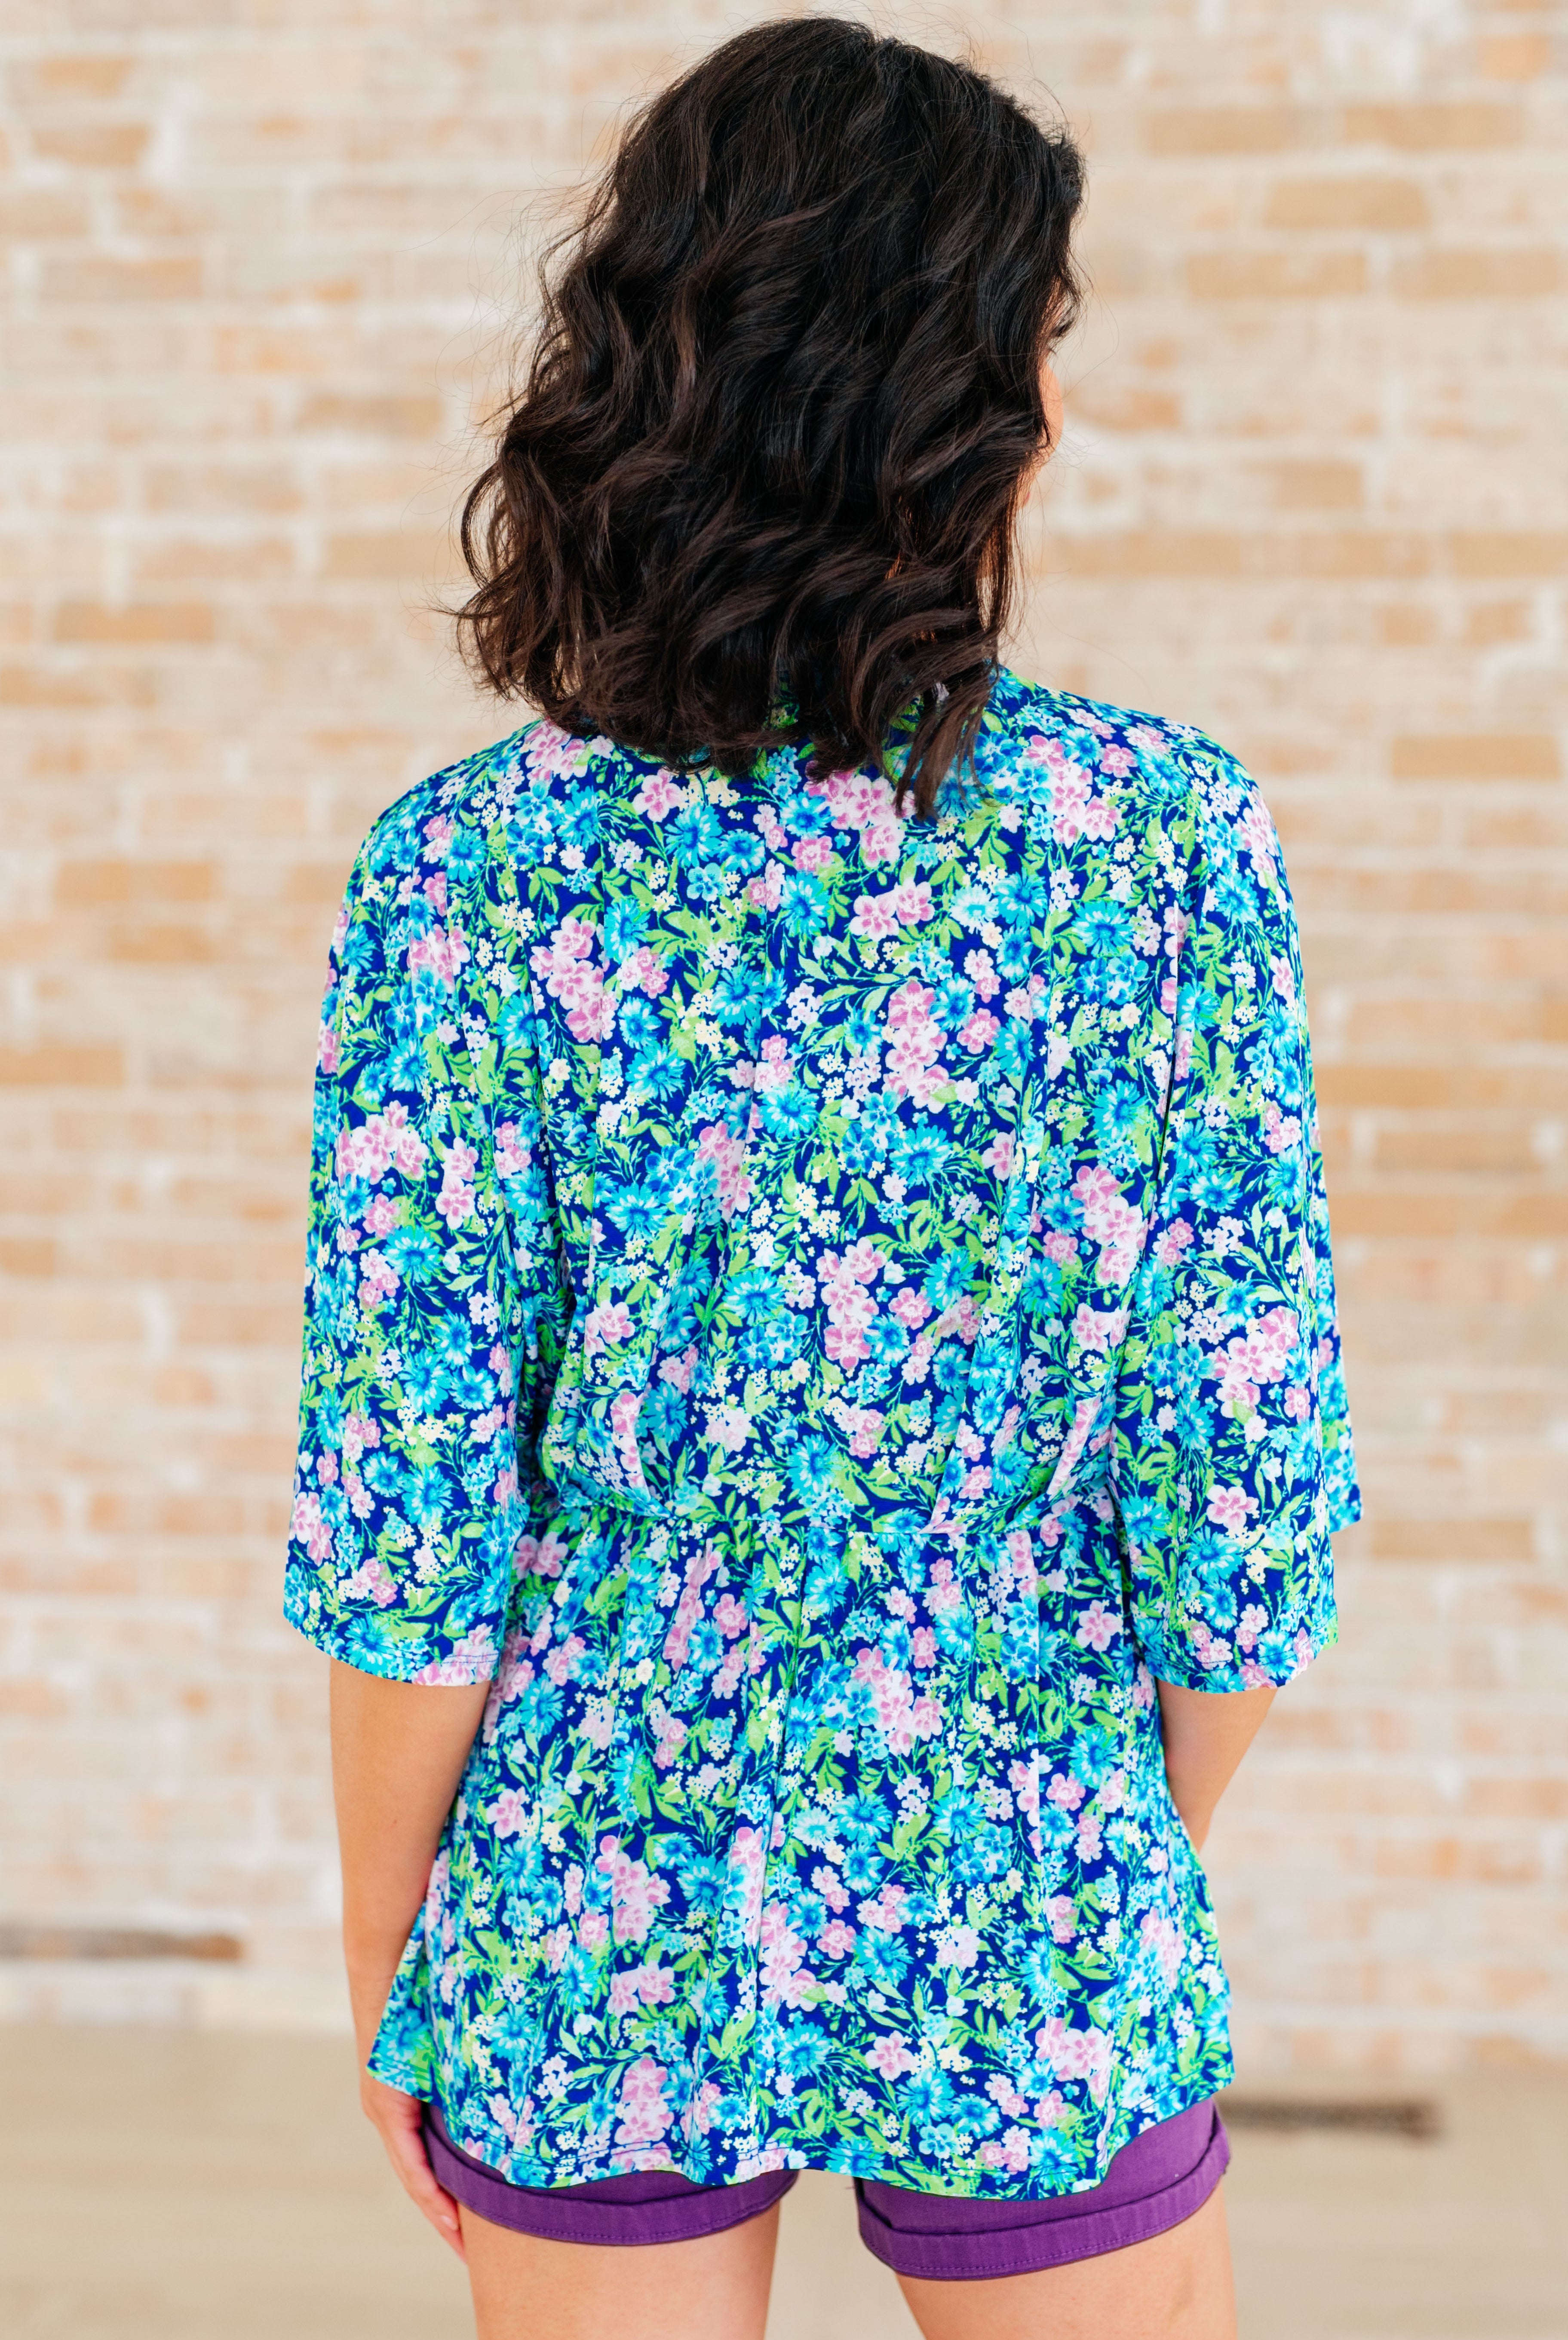 Dreamer Peplum Top in Navy and Mint Floral-Long Sleeve Tops-Krush Kandy, Women's Online Fashion Boutique Located in Phoenix, Arizona (Scottsdale Area)